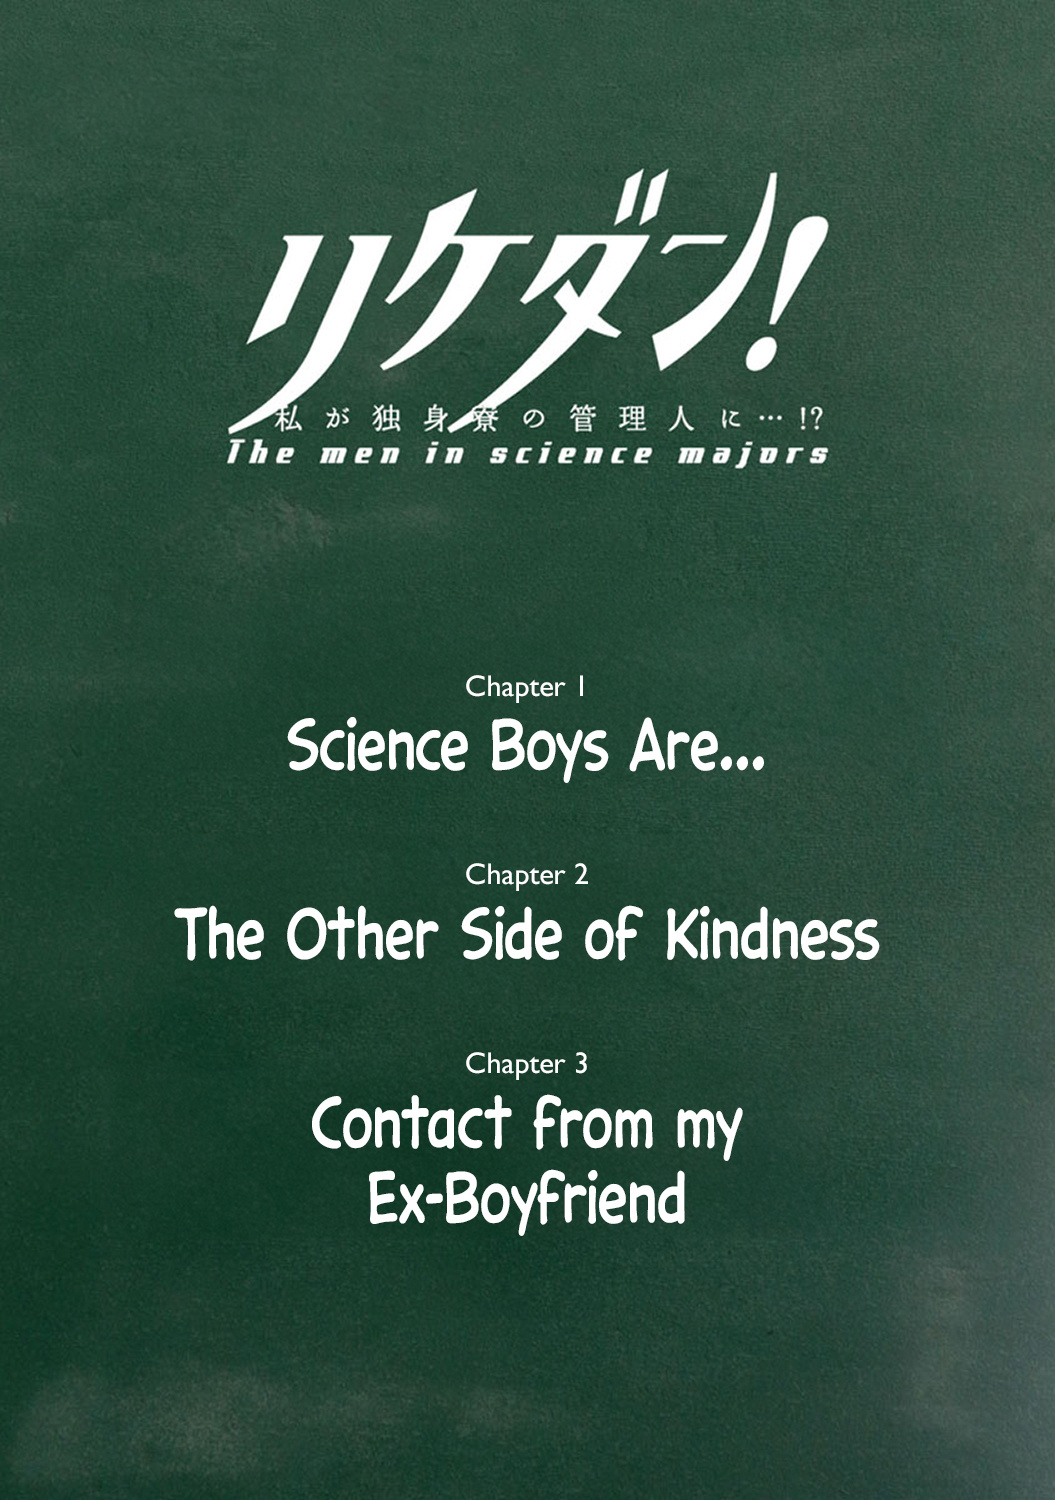 The Men In Science Majors Vol.1 Chapter 1: Science Boys Are... - Picture 2